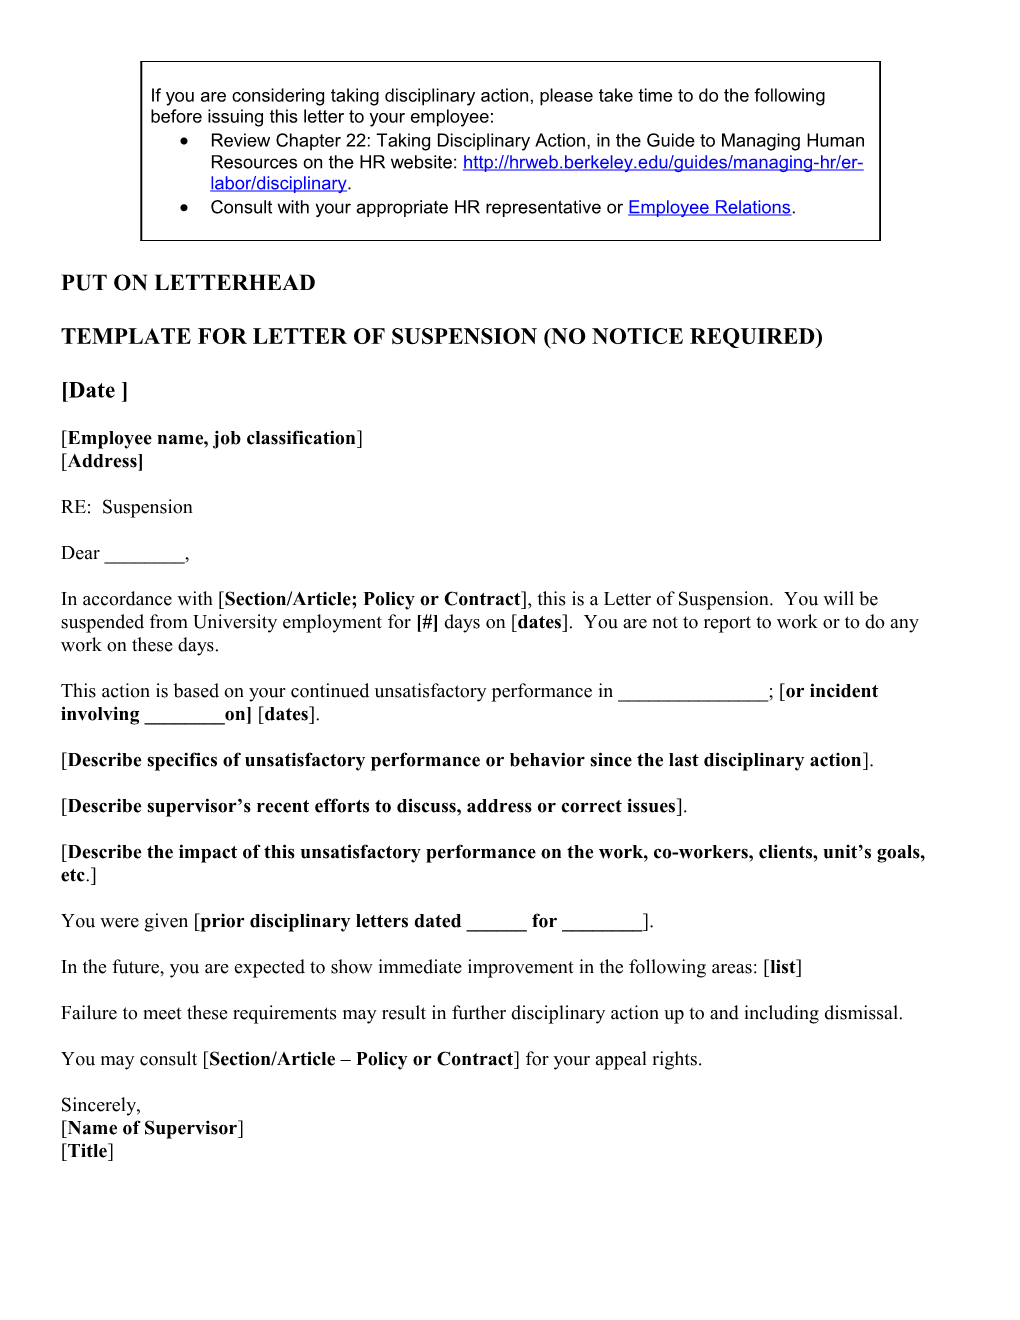 Template for Letter of Suspension (No Notice Required)